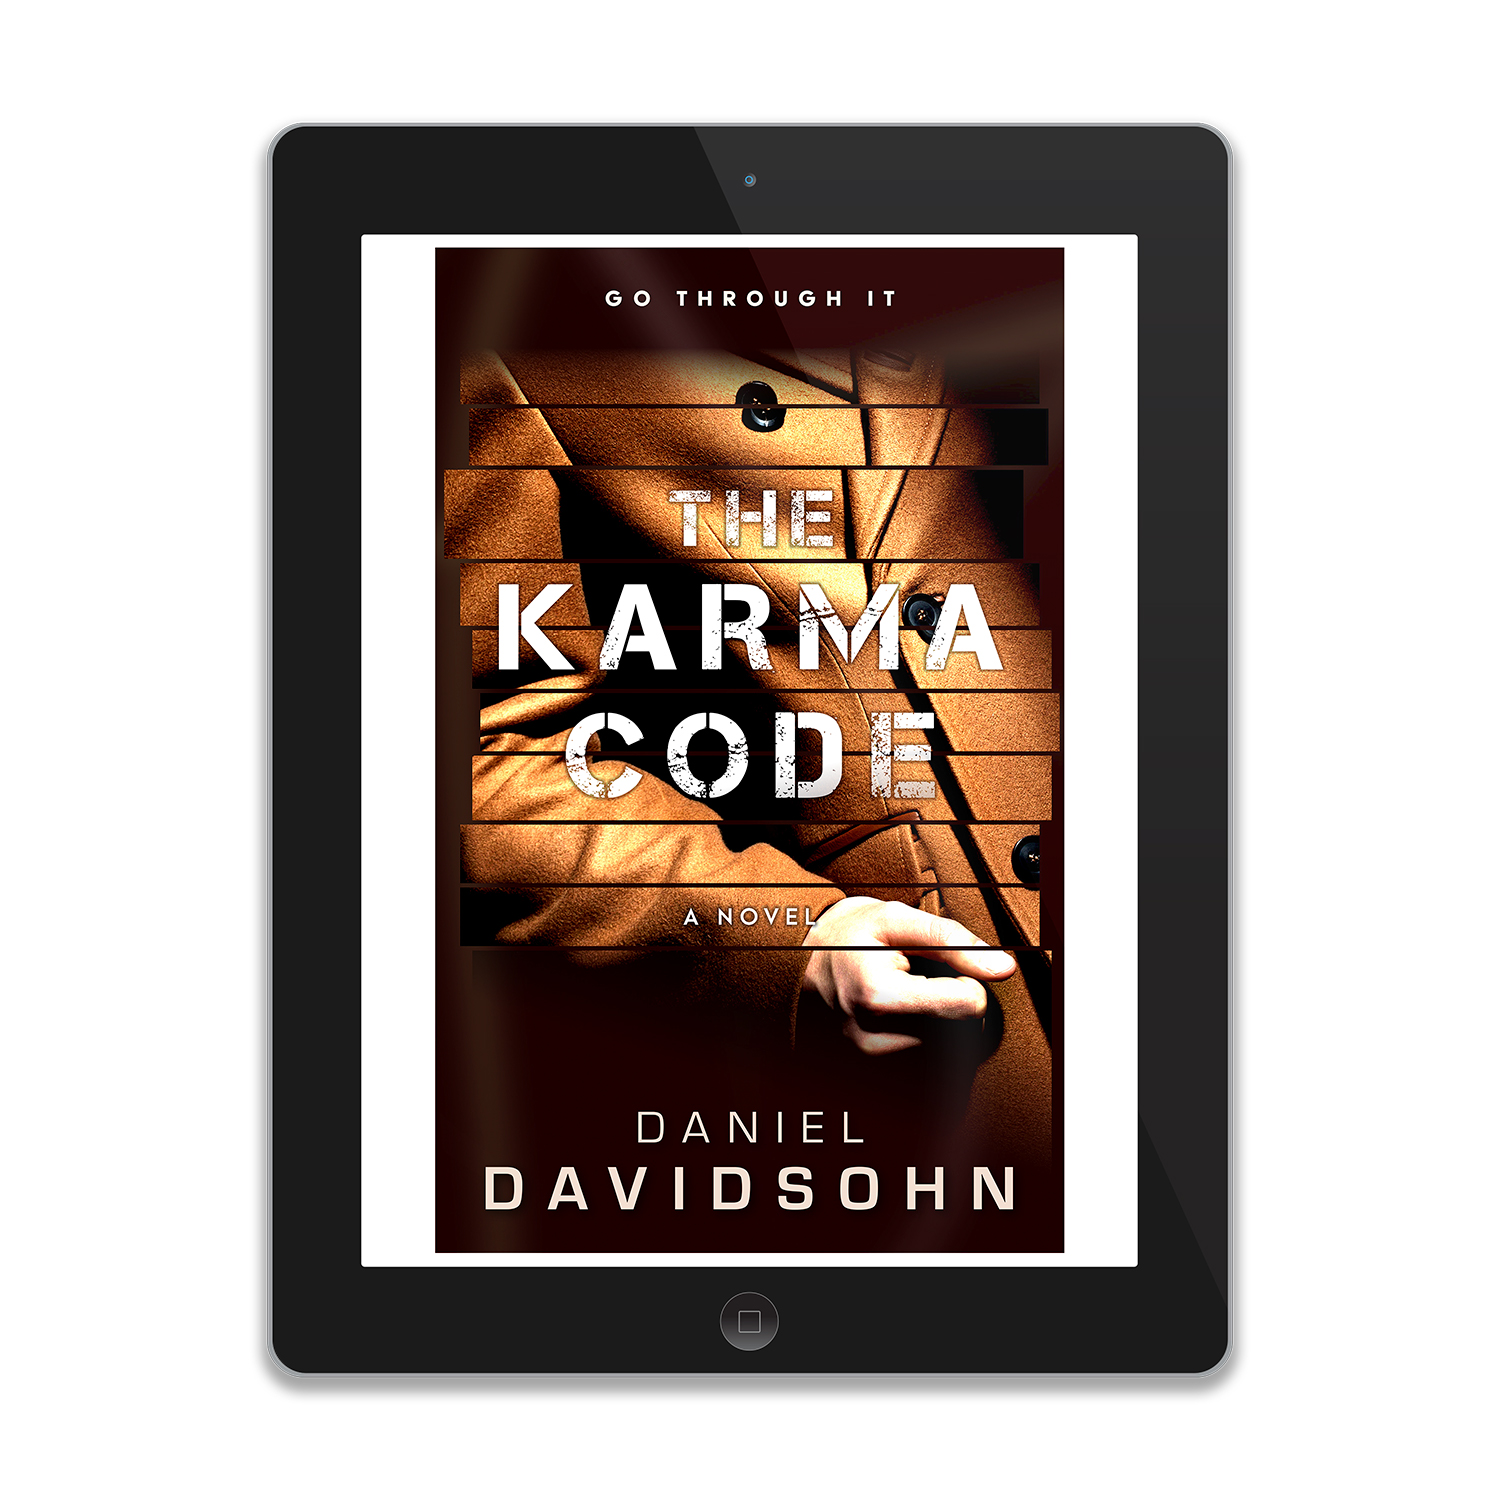 'The Karma Code' is techno thriller, by author Daniel Davidsohn. The book cover & interior were designed by Mark Thomas, of coverness.com. To find out more about my book design services, please visit www.coverness.com.